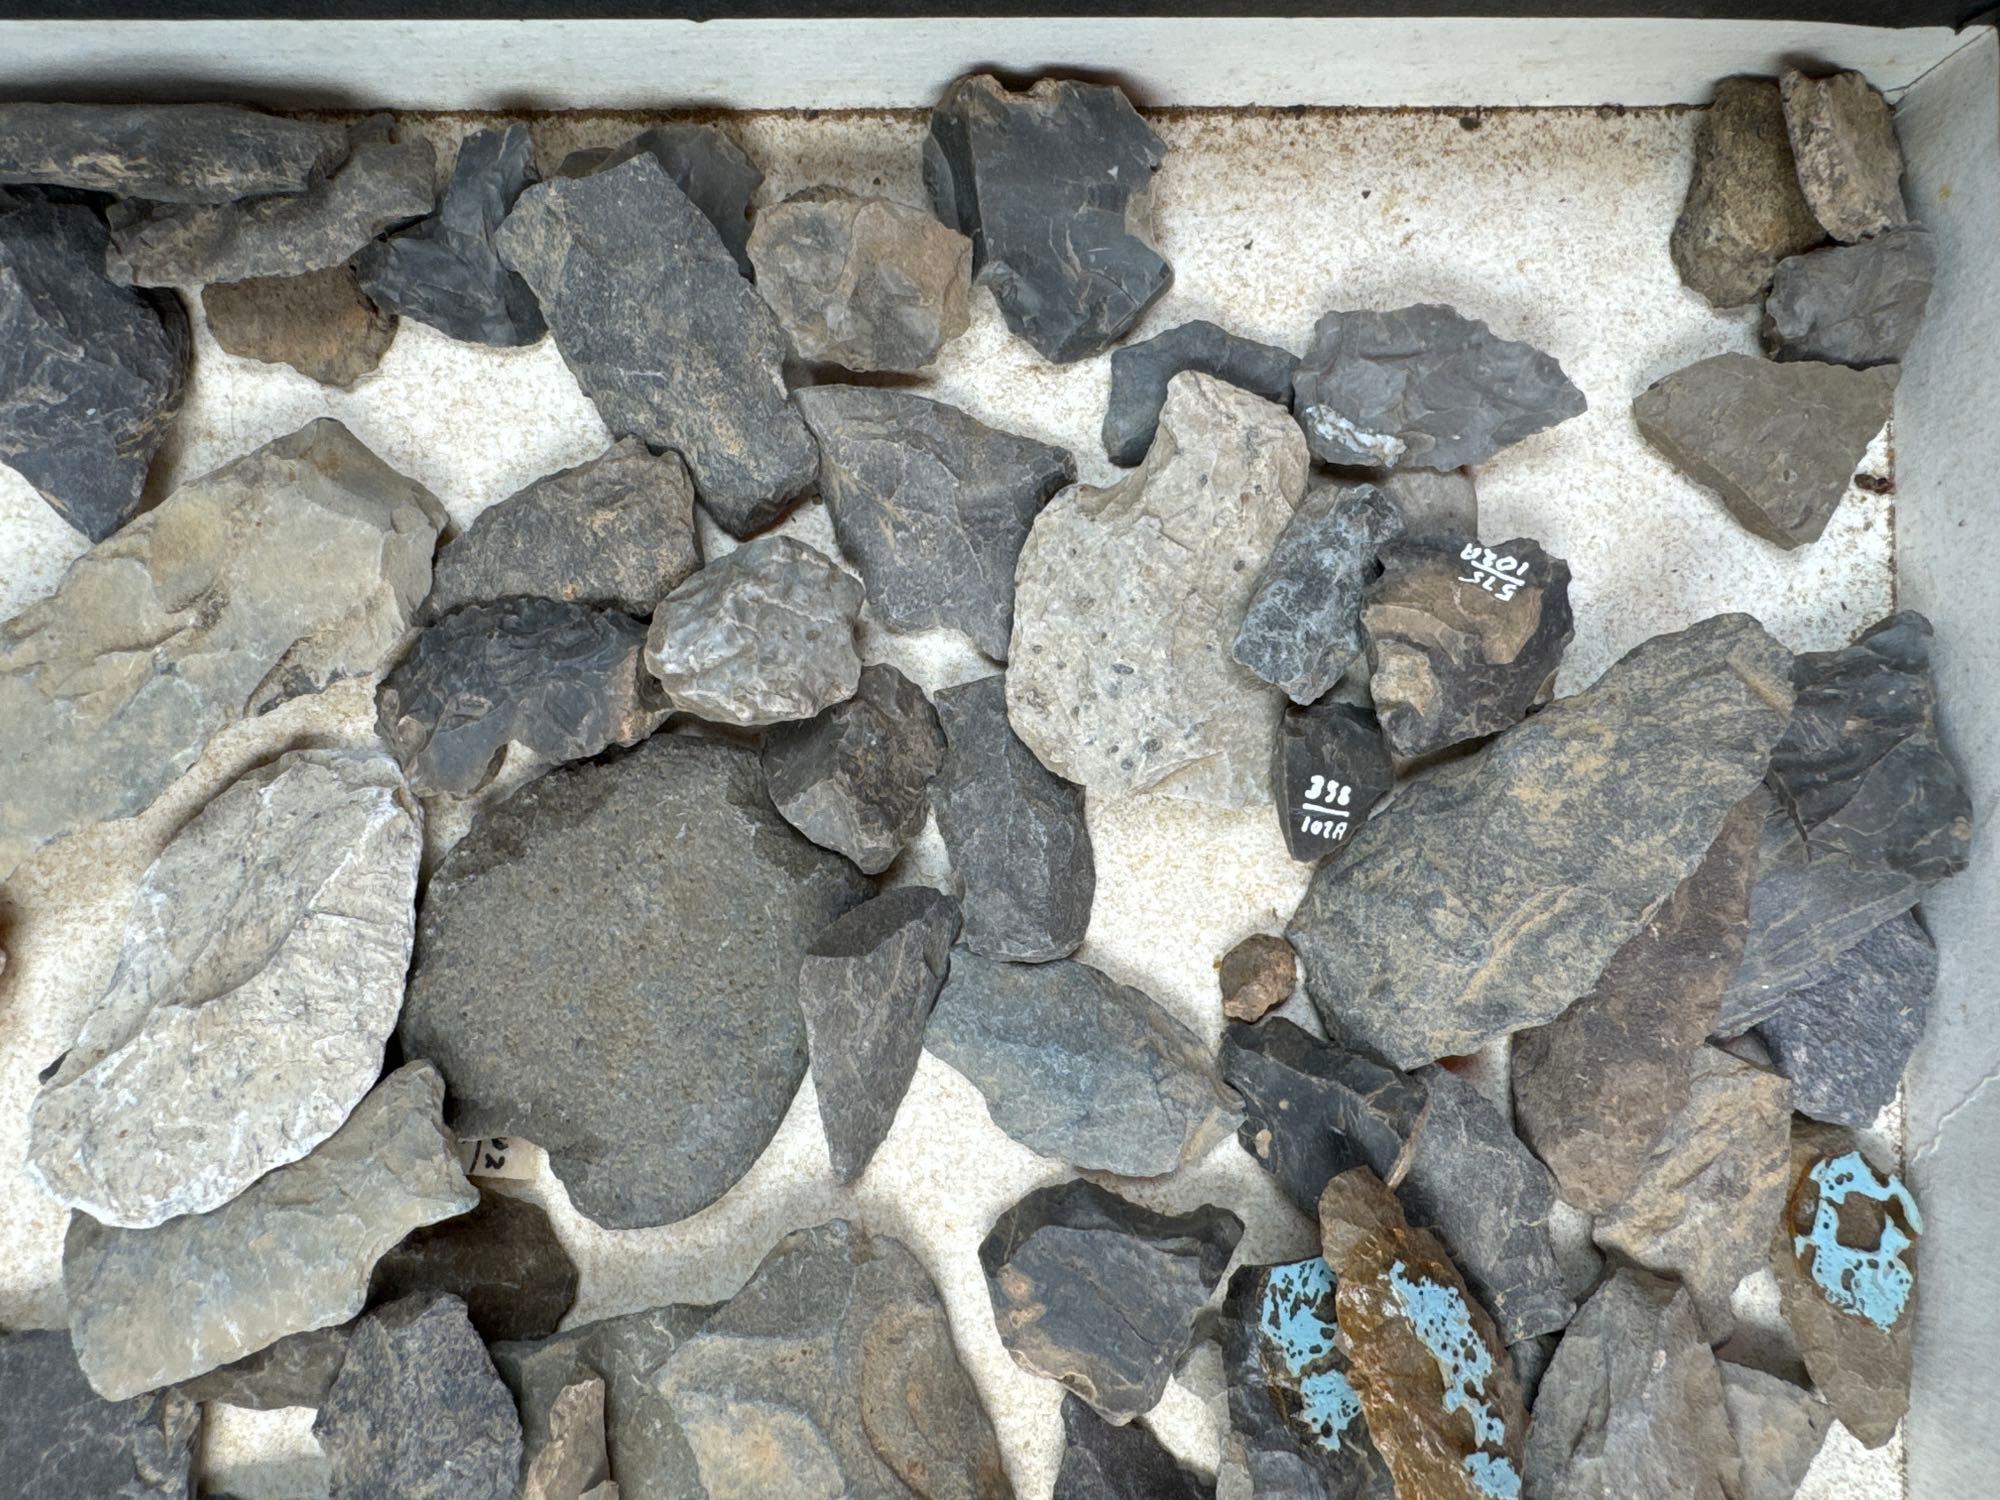 2 Flats of Various Site Material, Artifacts, Found in New York, Ex: Dave Summers Collection